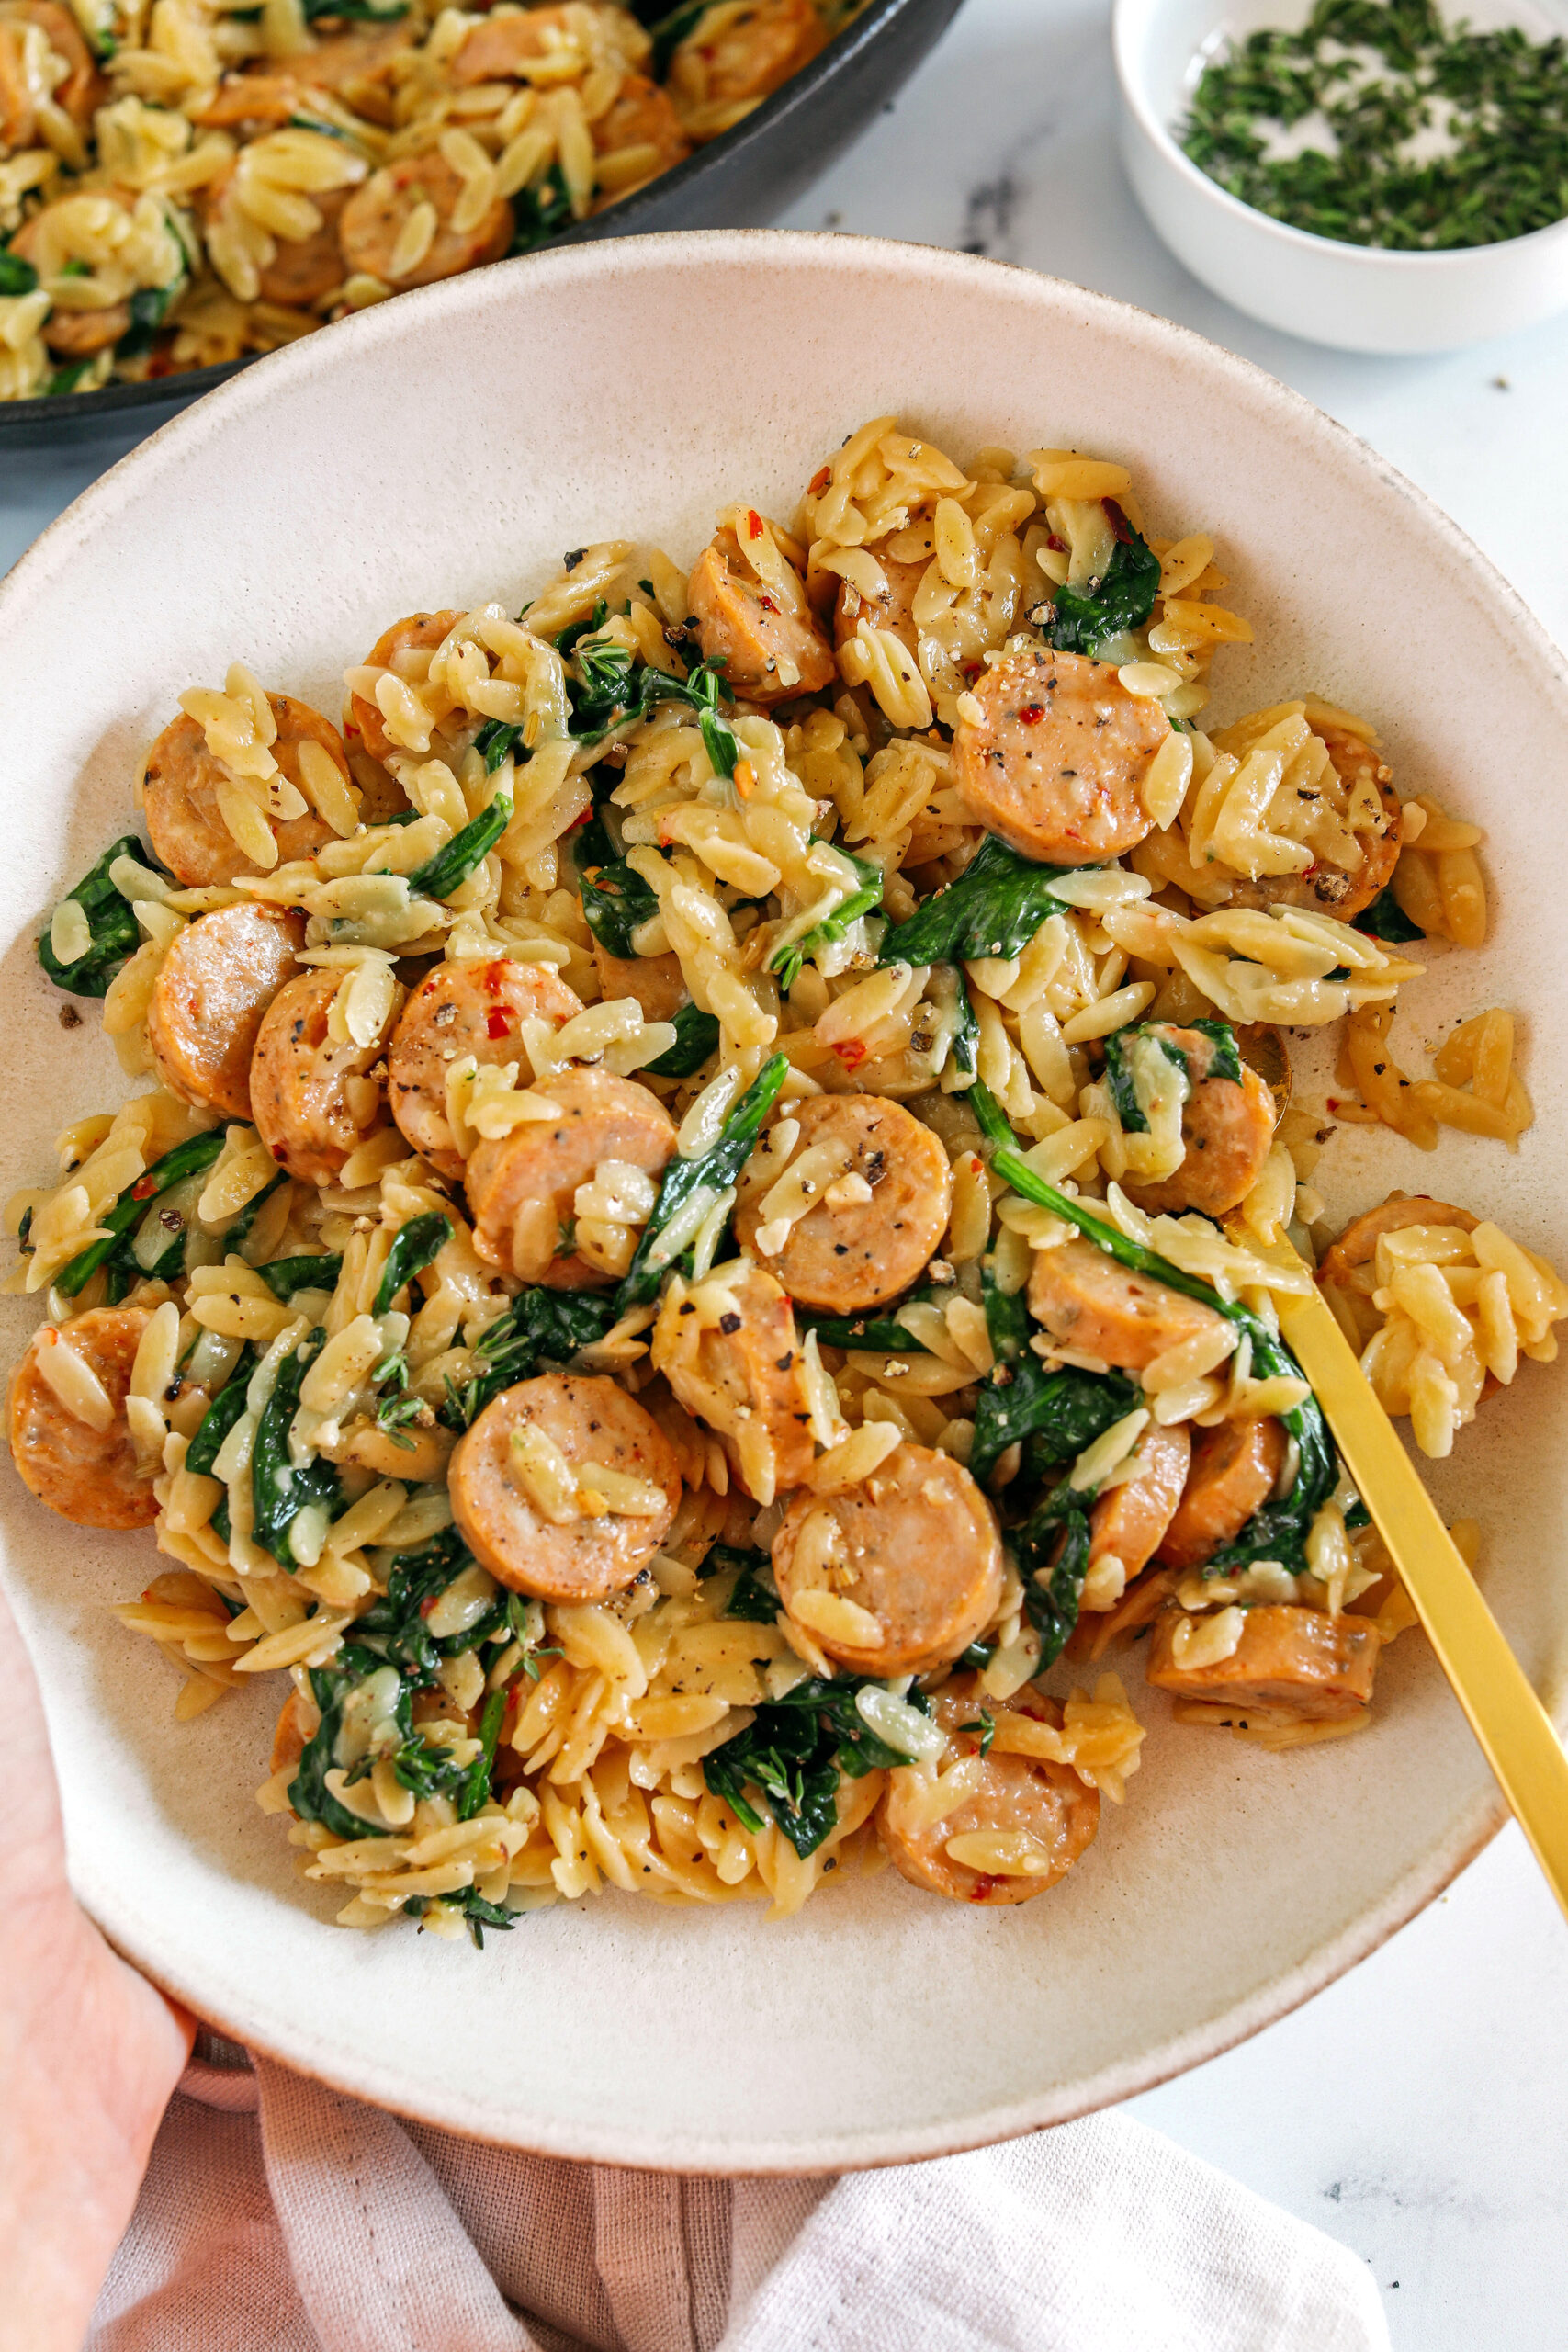 This Creamy Chicken Sausage Orzo Skillet is the perfect weeknight meal loaded with flavorful chicken sausage, tender orzo, tons of garlic and leafy spinach easily made in just 20 minutes all in one pan!  